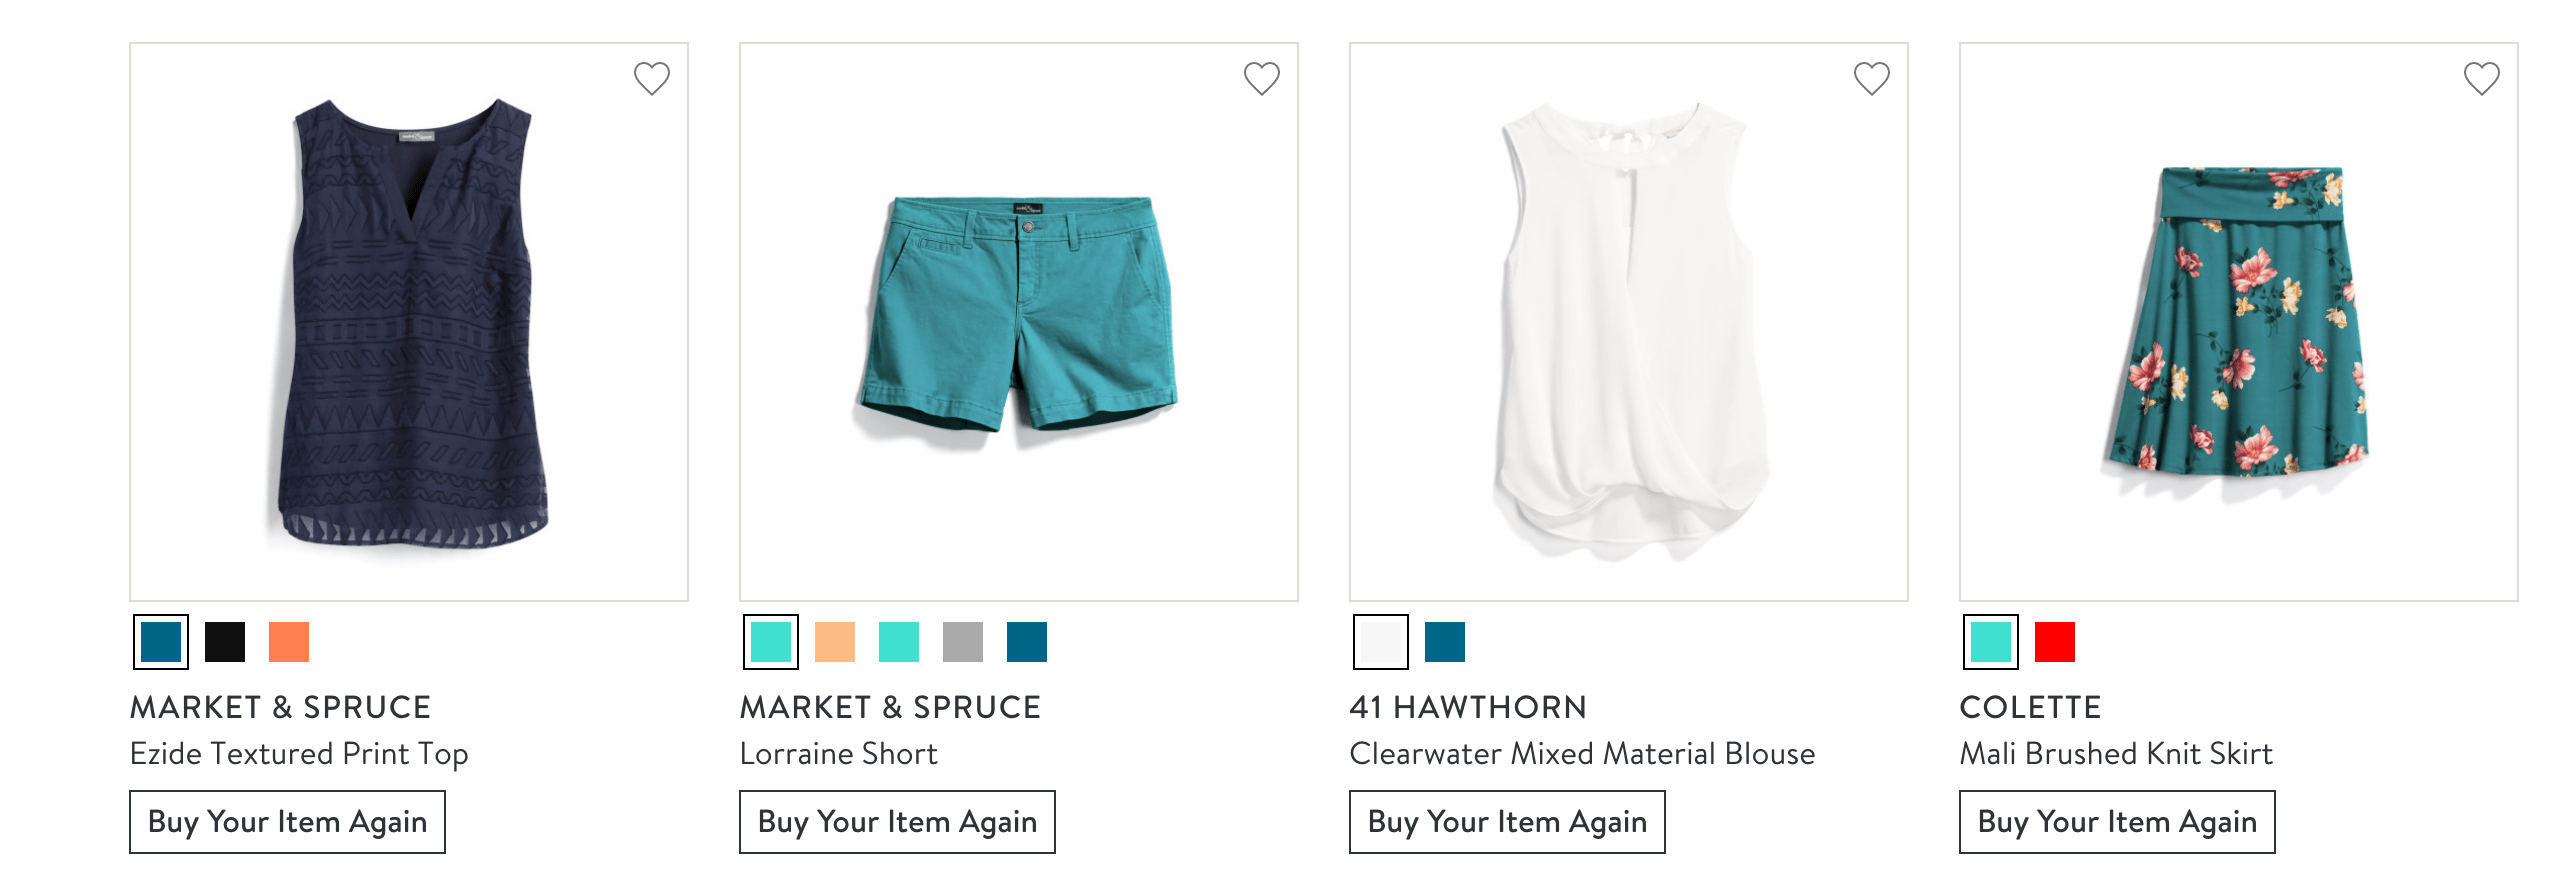 Stitch Fix items in different colors